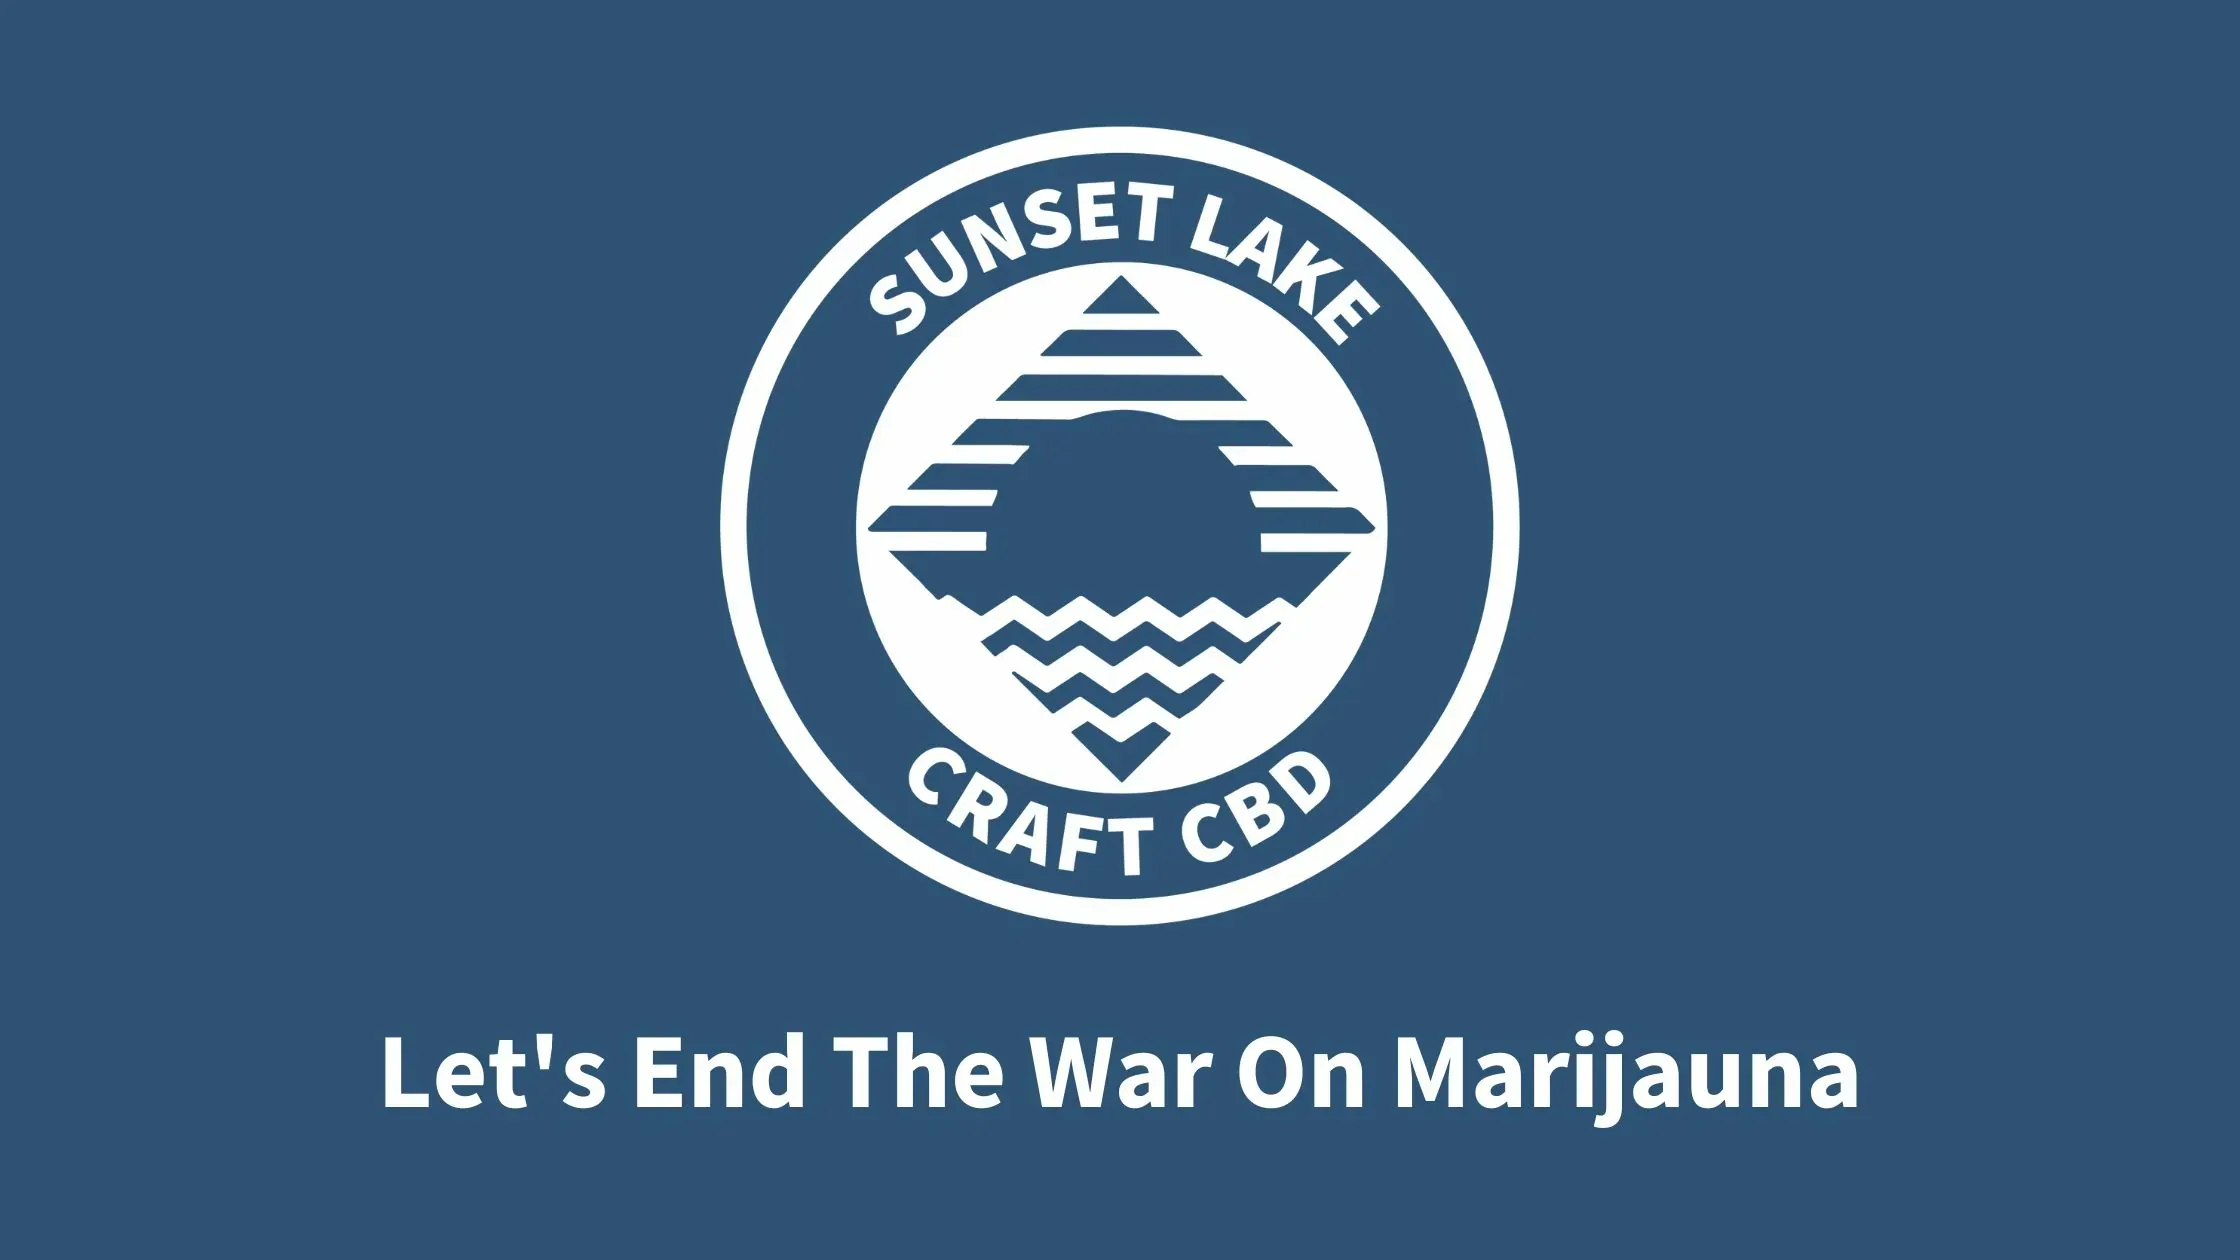 Sunset Lake CBD logo on blue with the text "Let's end the war on marijuana"